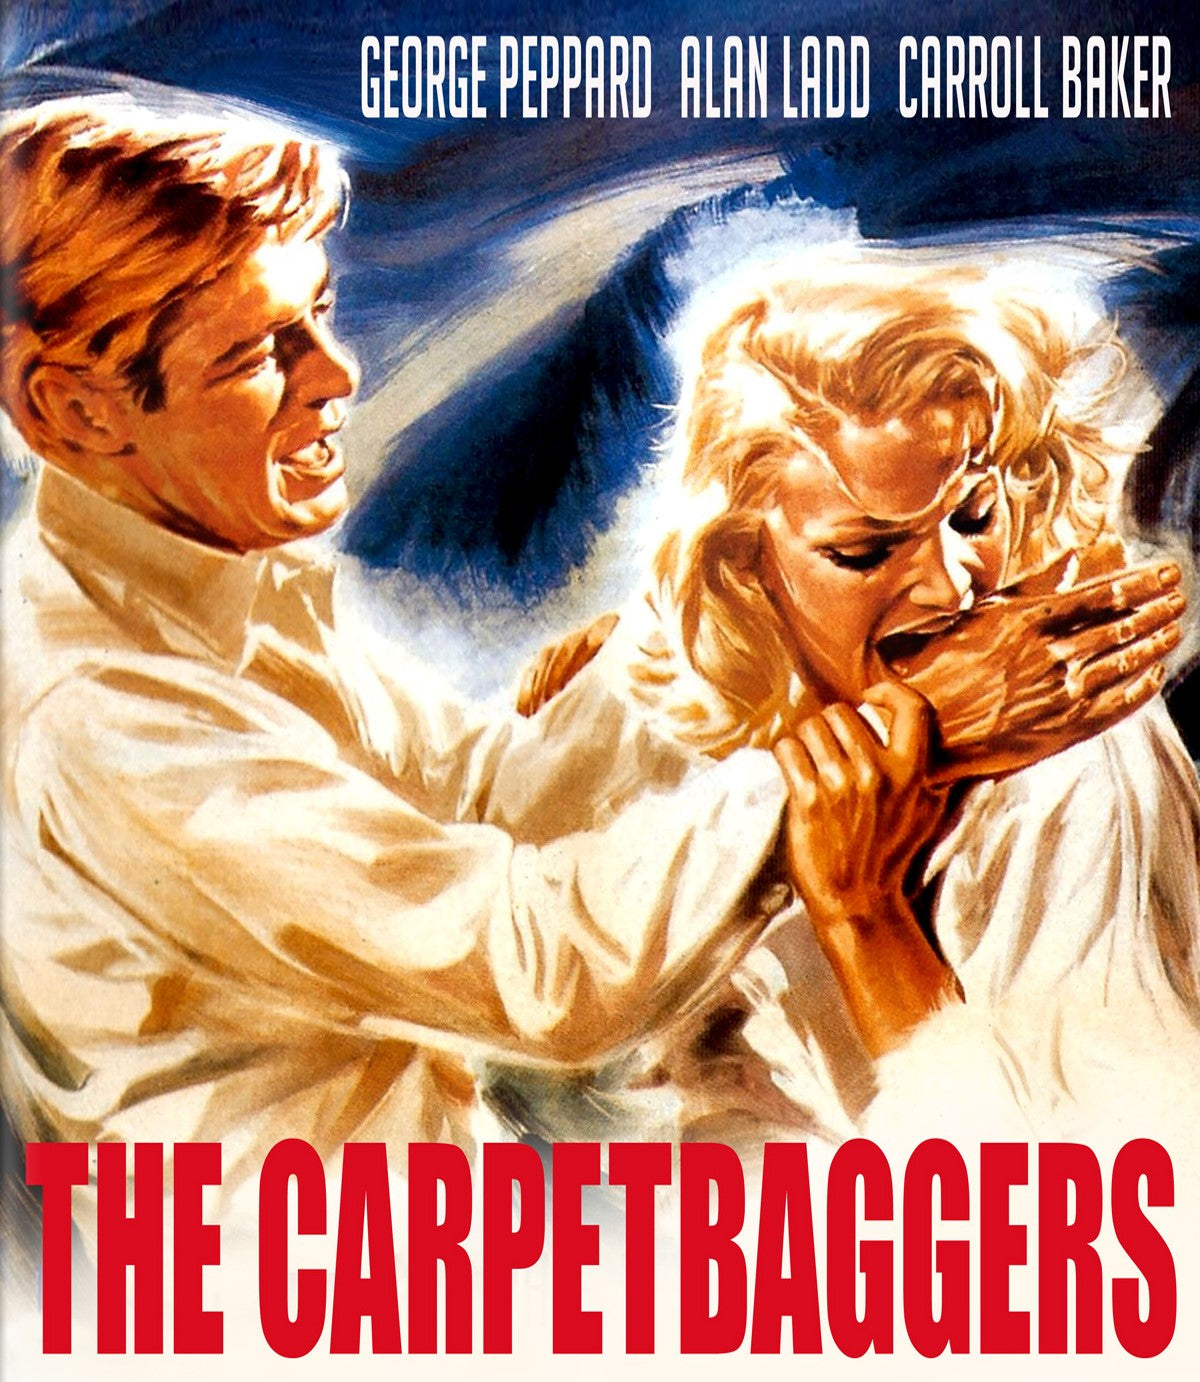 THE CARPETBAGGERS BLU-RAY